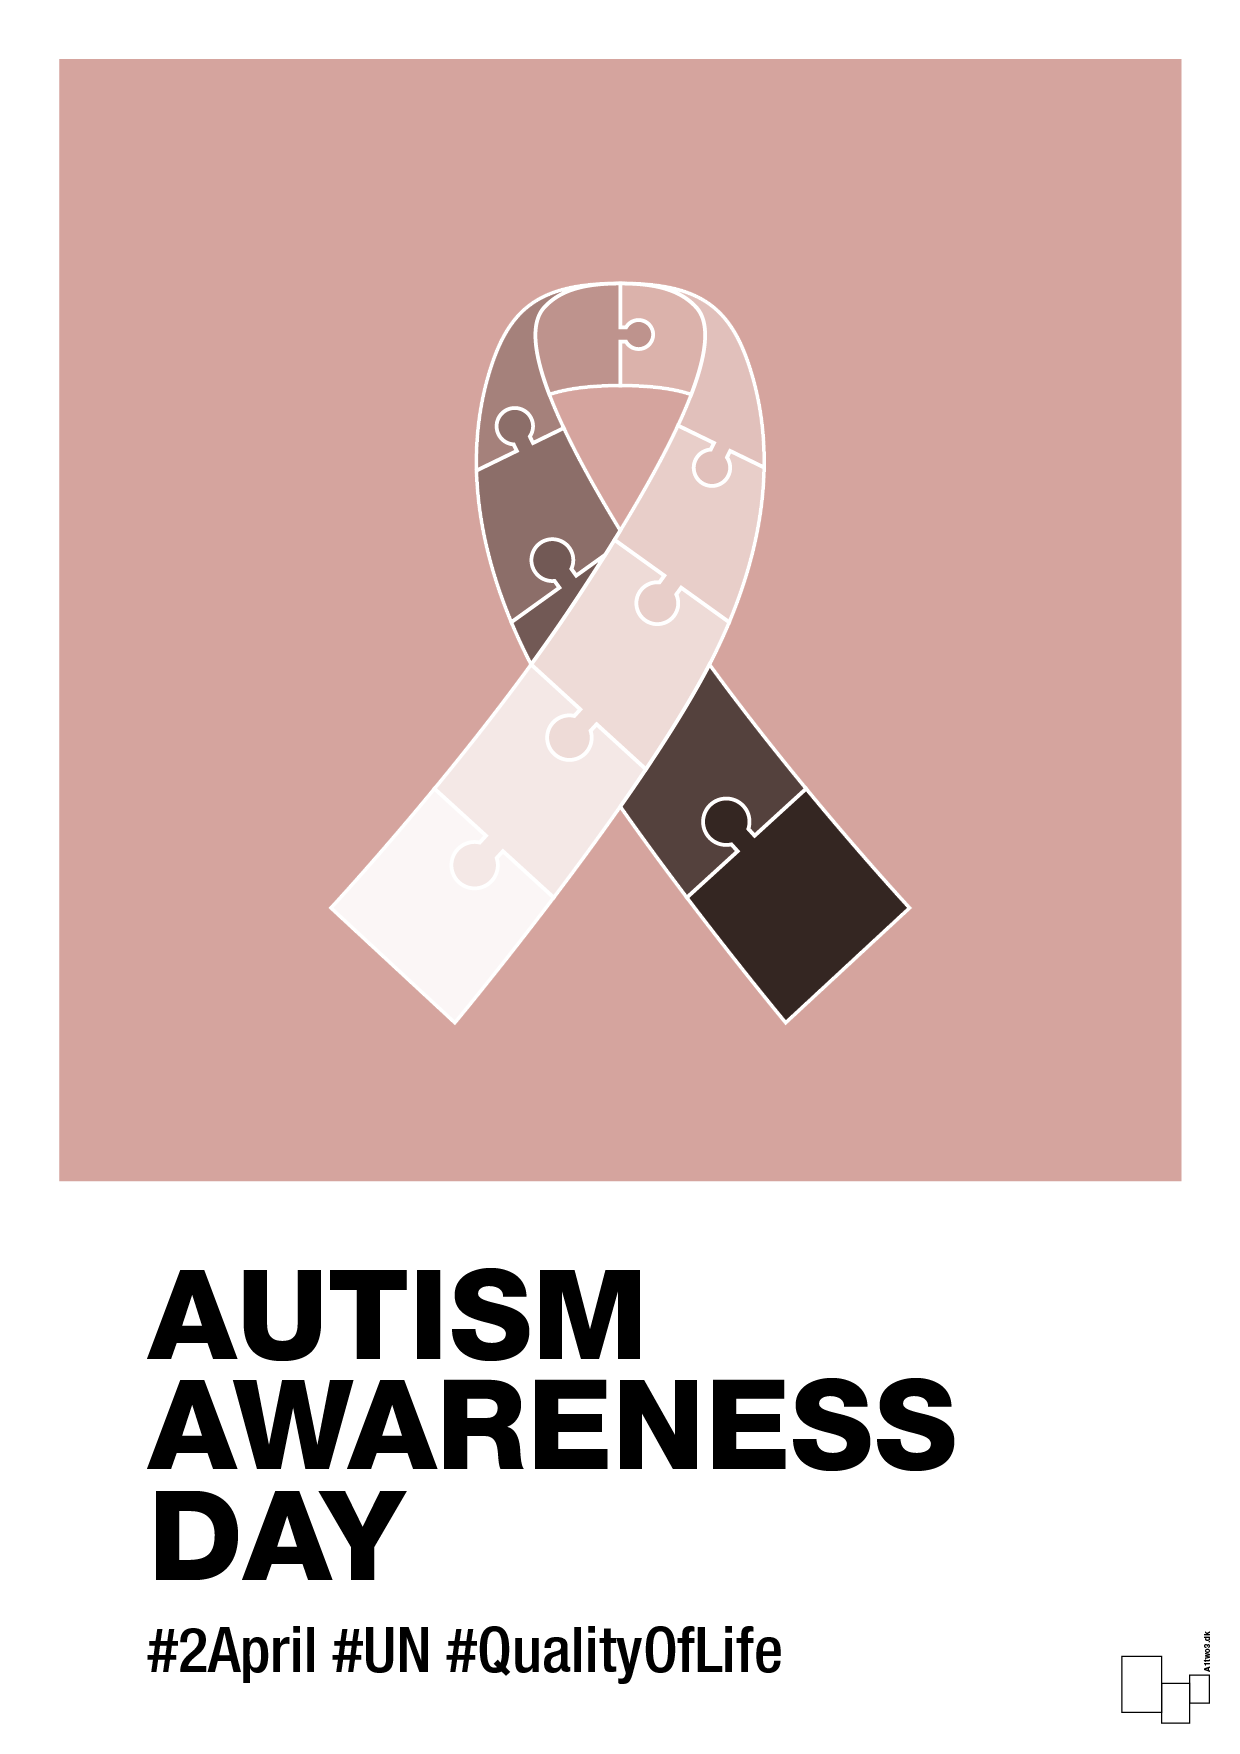 autism awareness day in monocolor - Plakat med Samfund i Bubble Shell